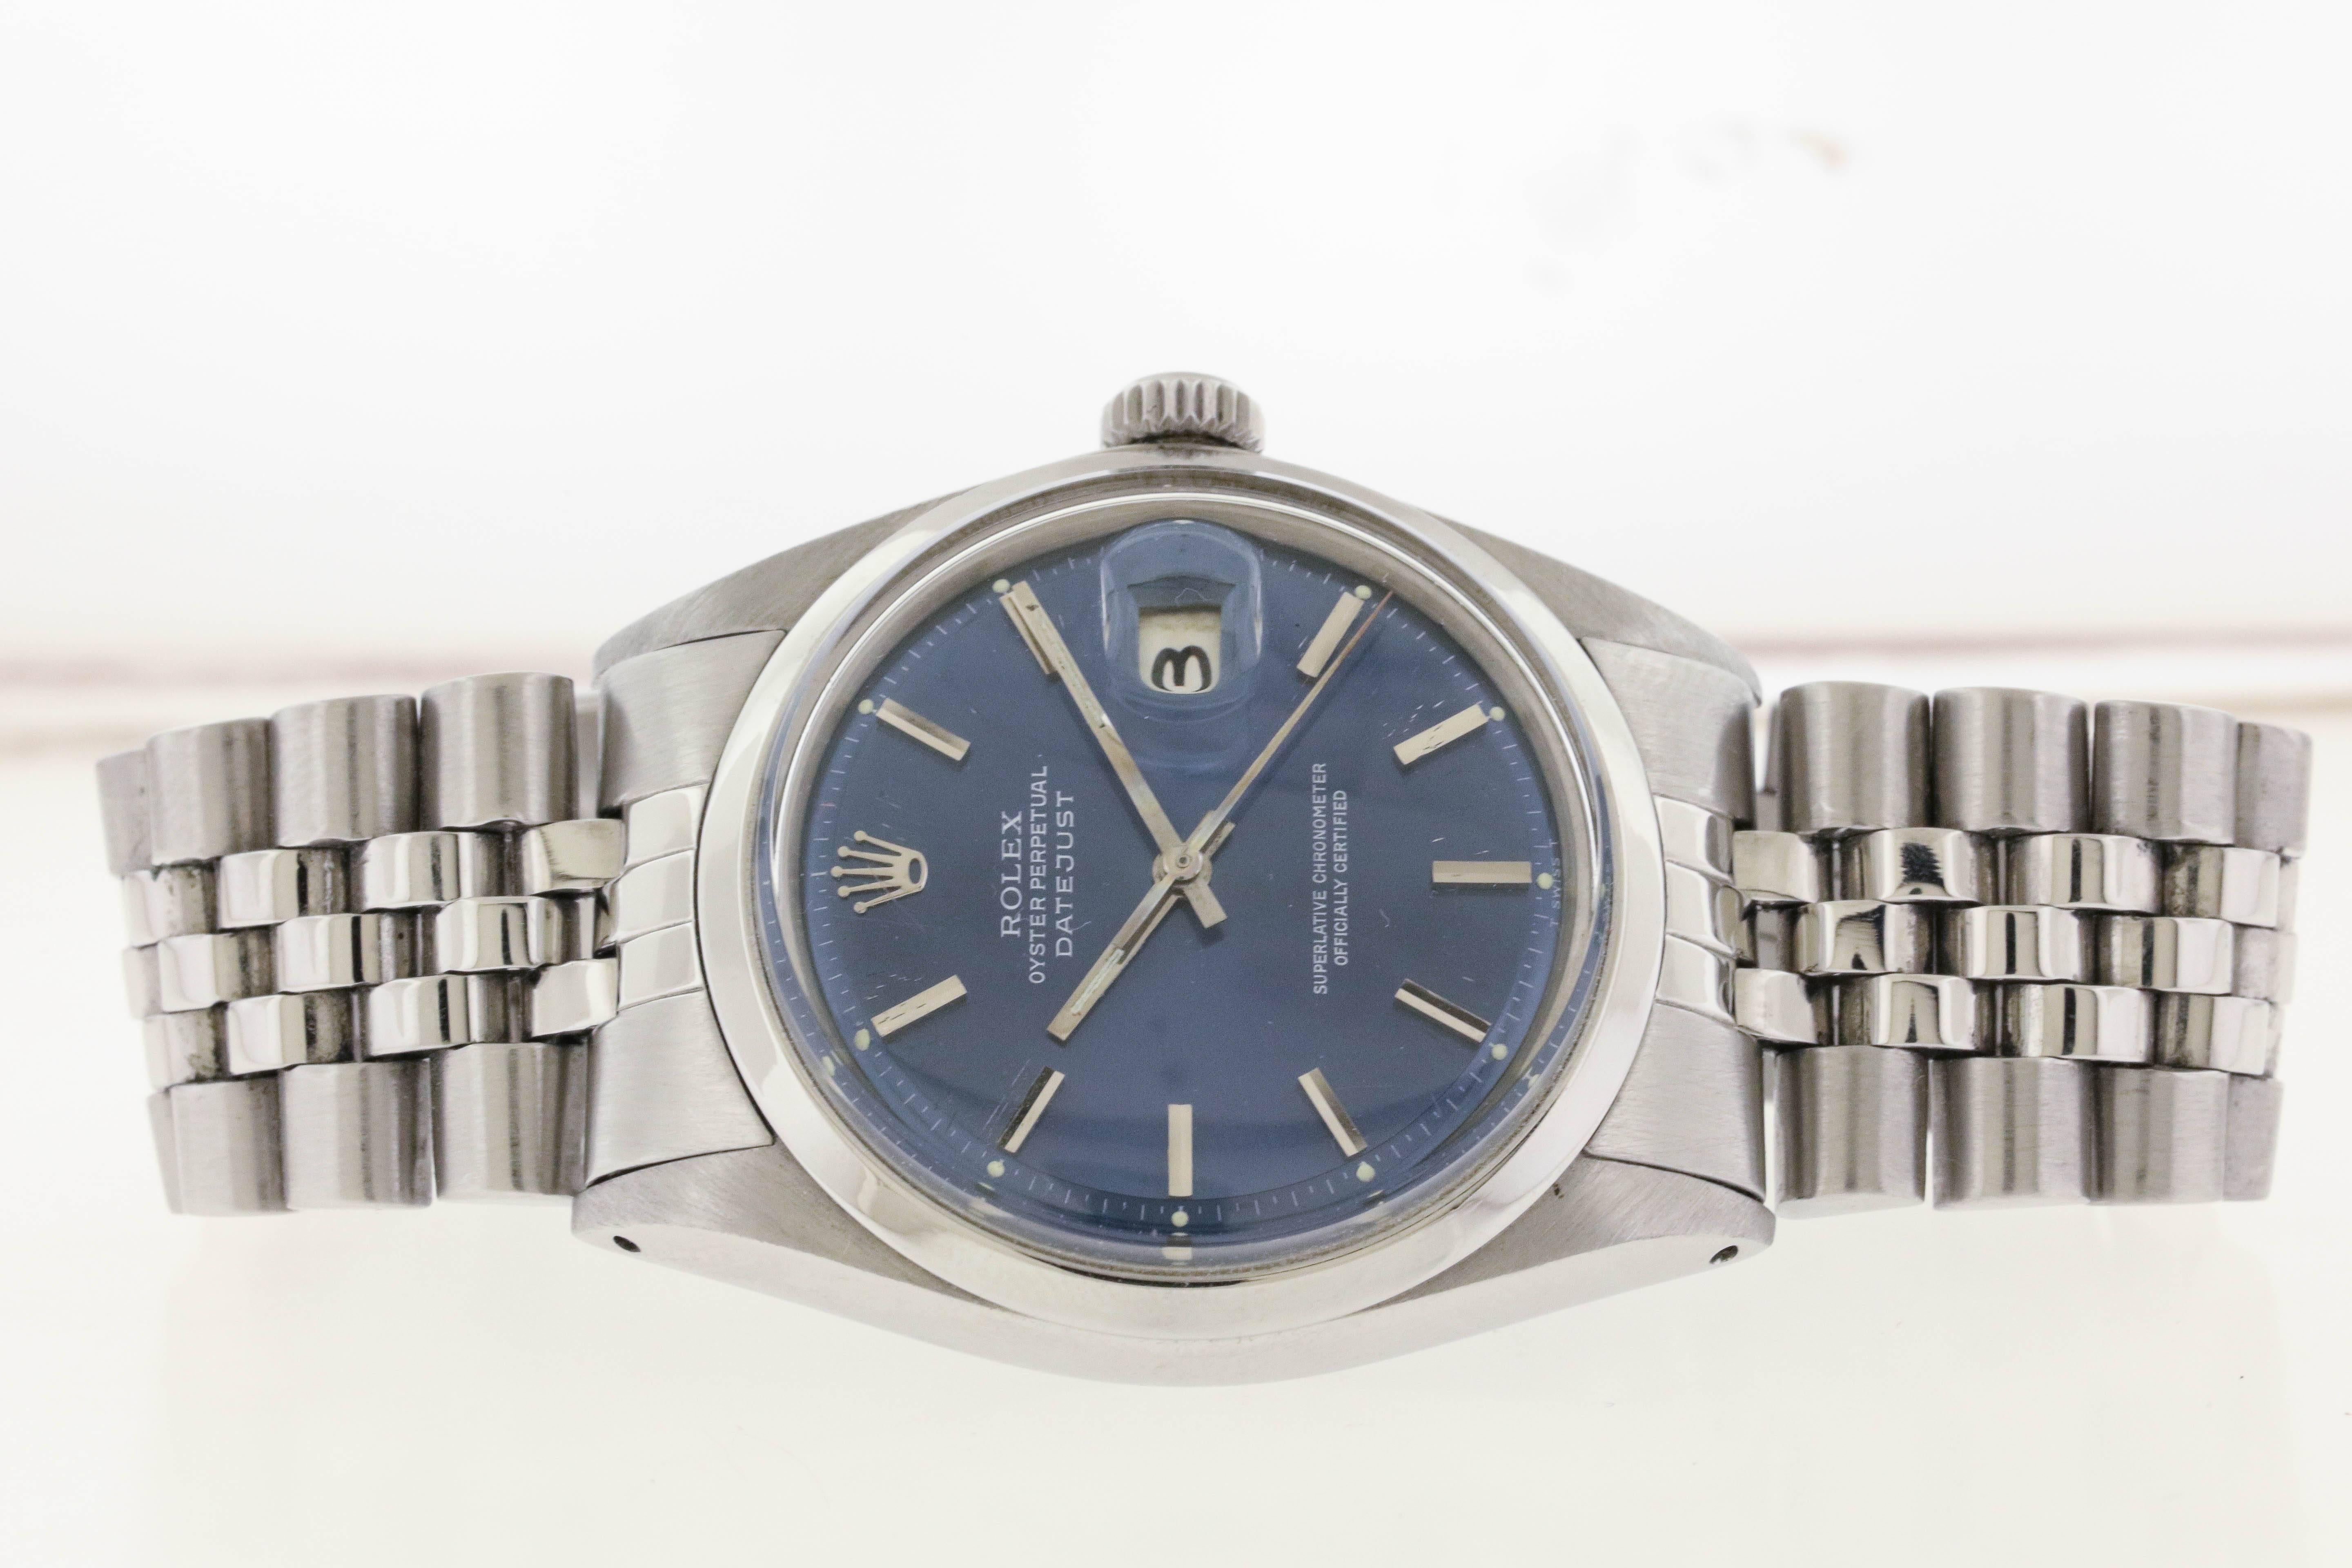 Stainless steel Rolex Oyster Perpetual Datejust, Ref. 1600, made in 1967, is a center seconds, self-winding, water-resistant, stainless steel chronometer wristwatch with date and steel Jubilee bracelet.  The 36mm case has a screw-down case back and